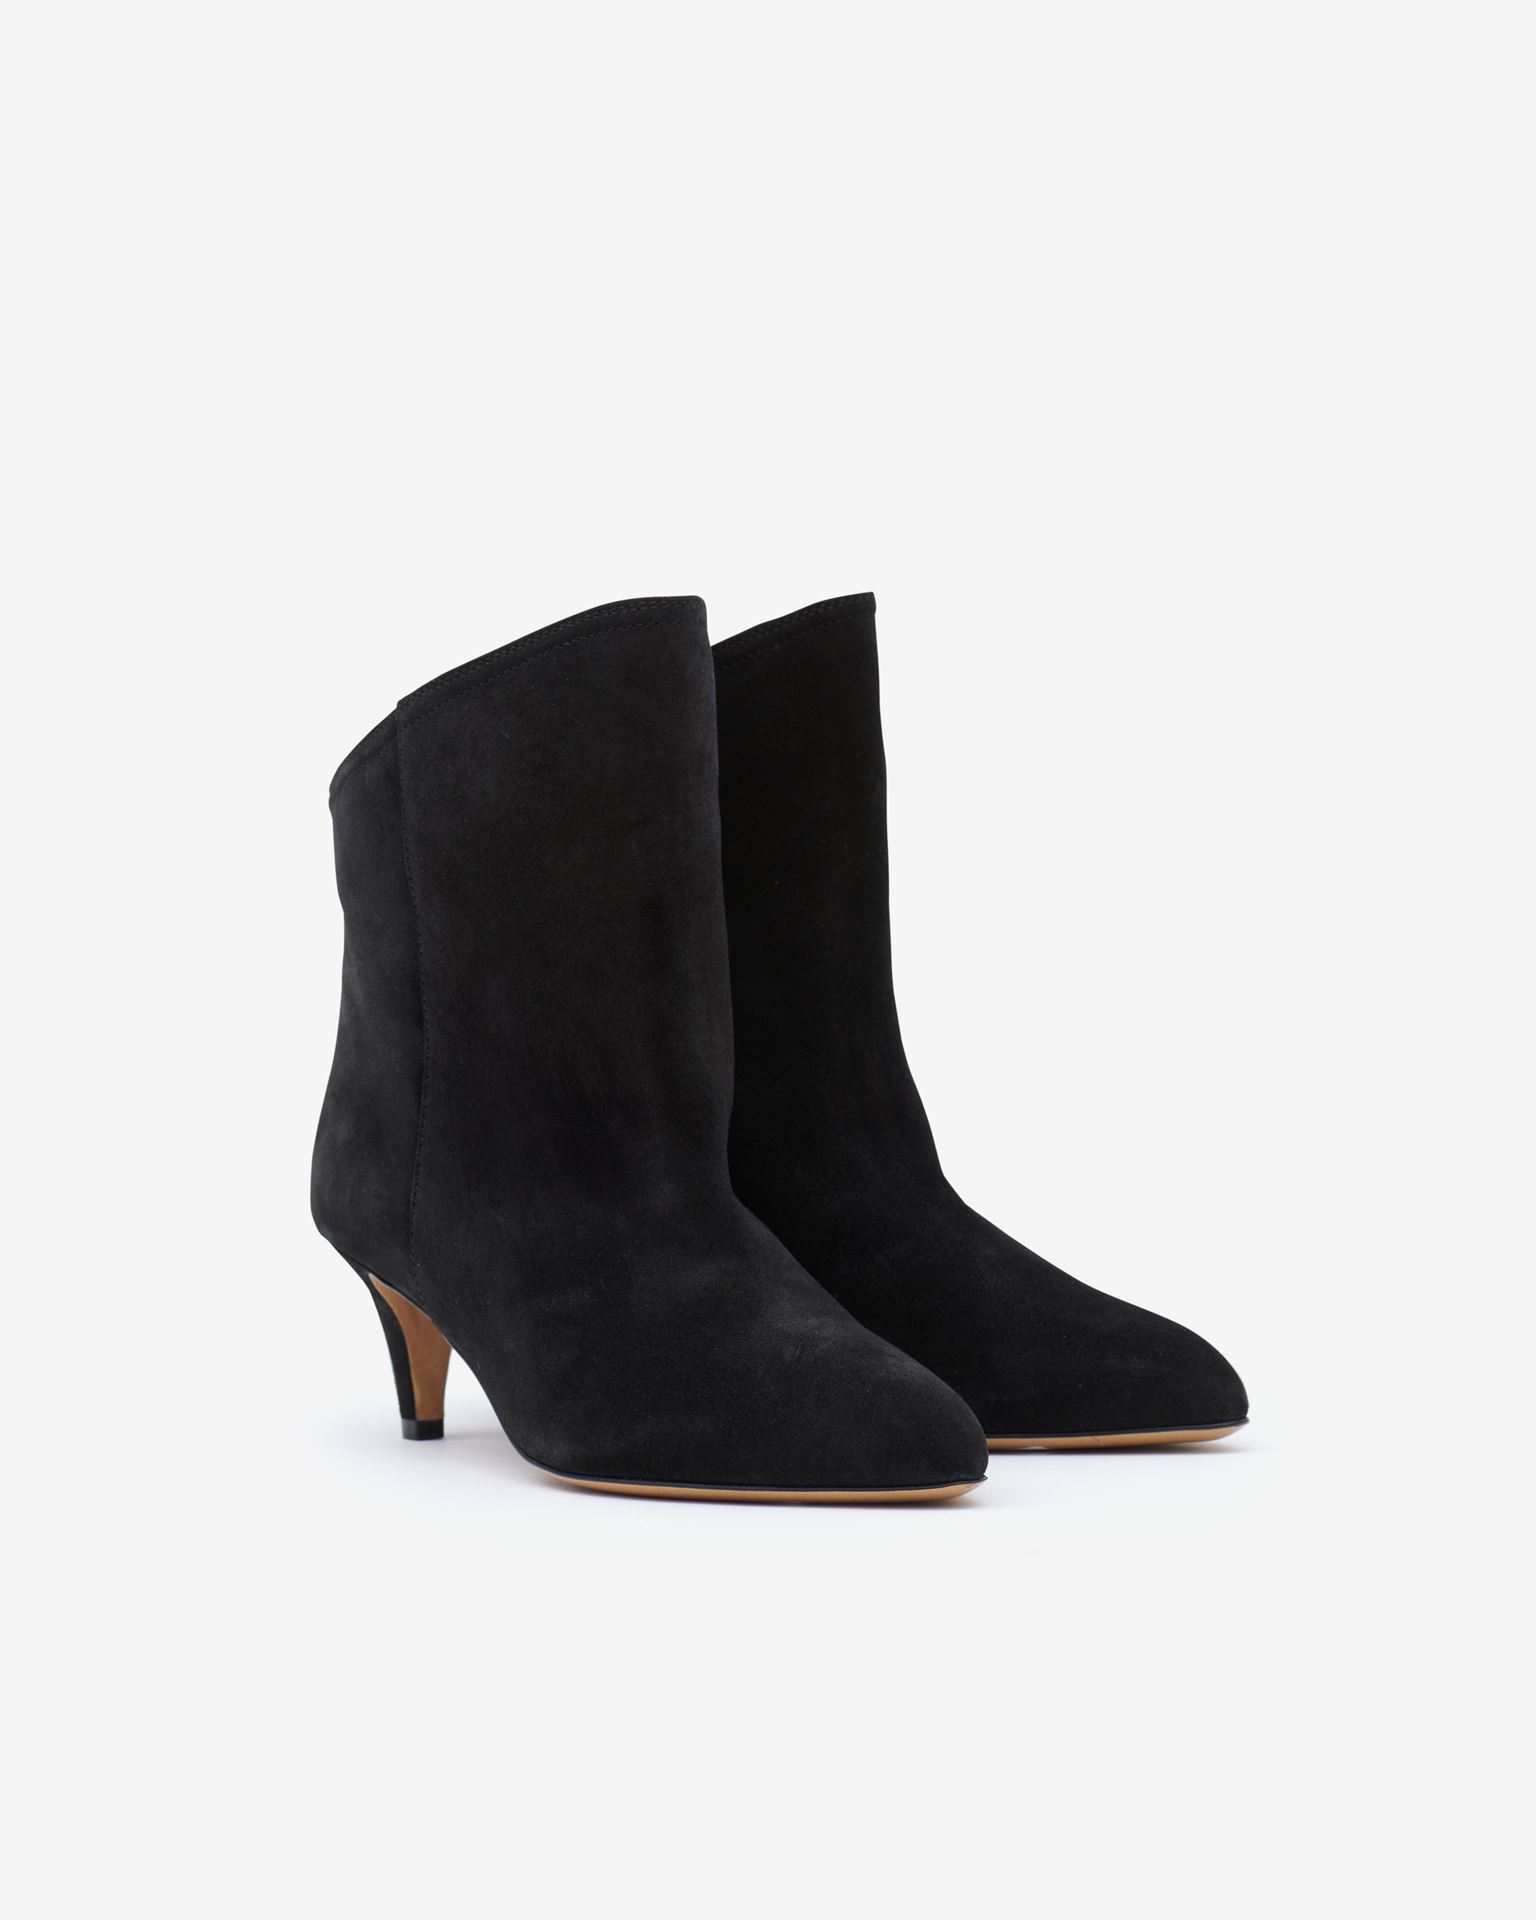 Isabel Marant, Dripi Suede Leather Ankle Boots - Women - Black